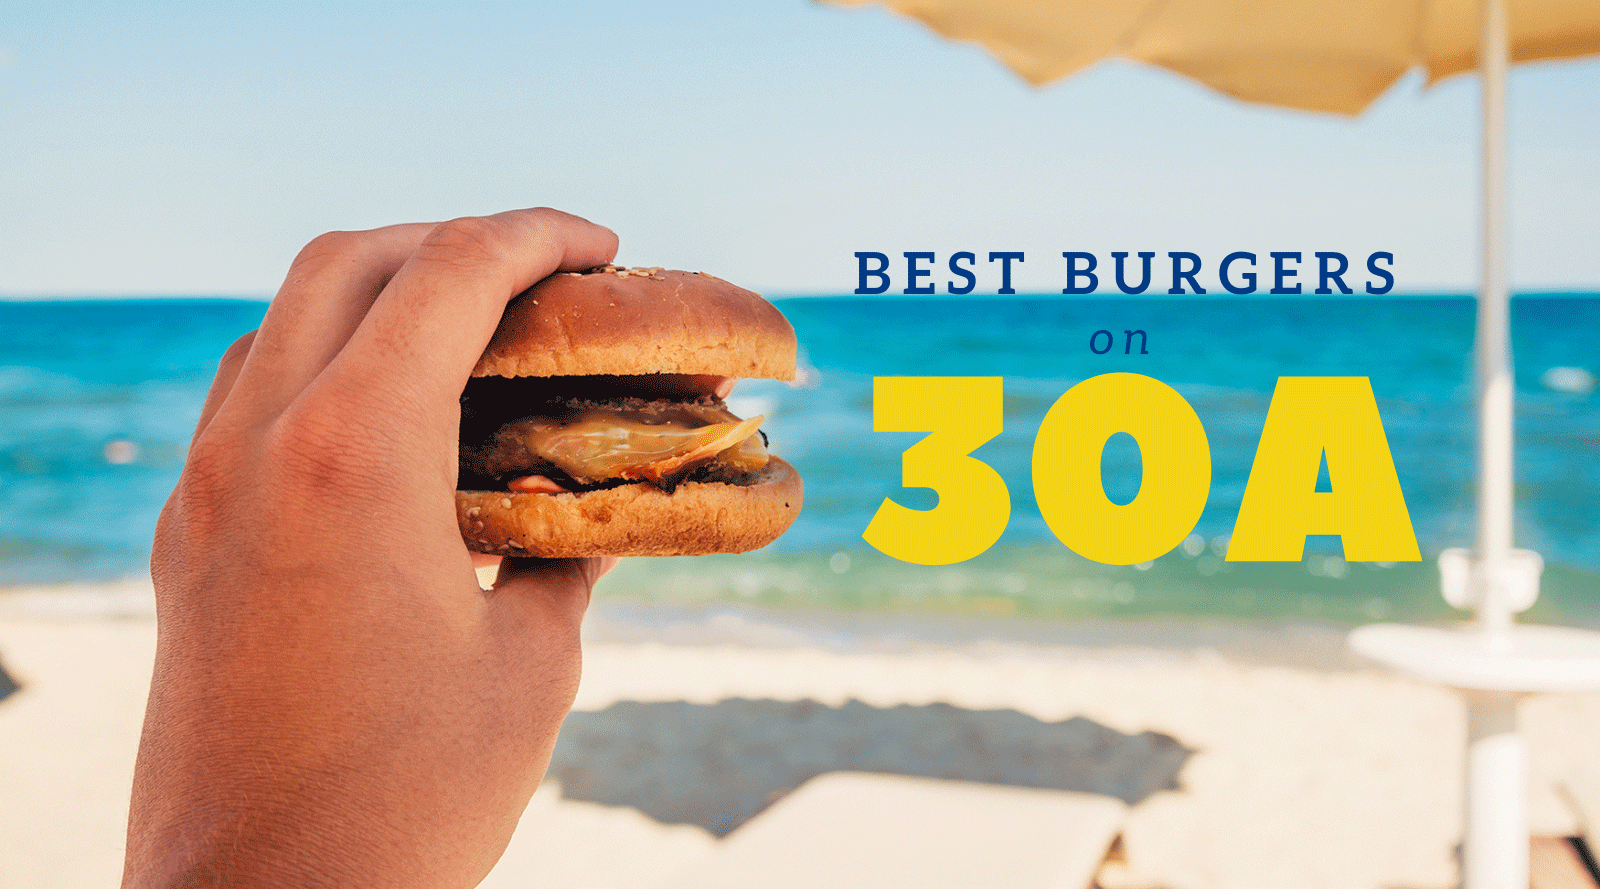 Best Burgers on 30A